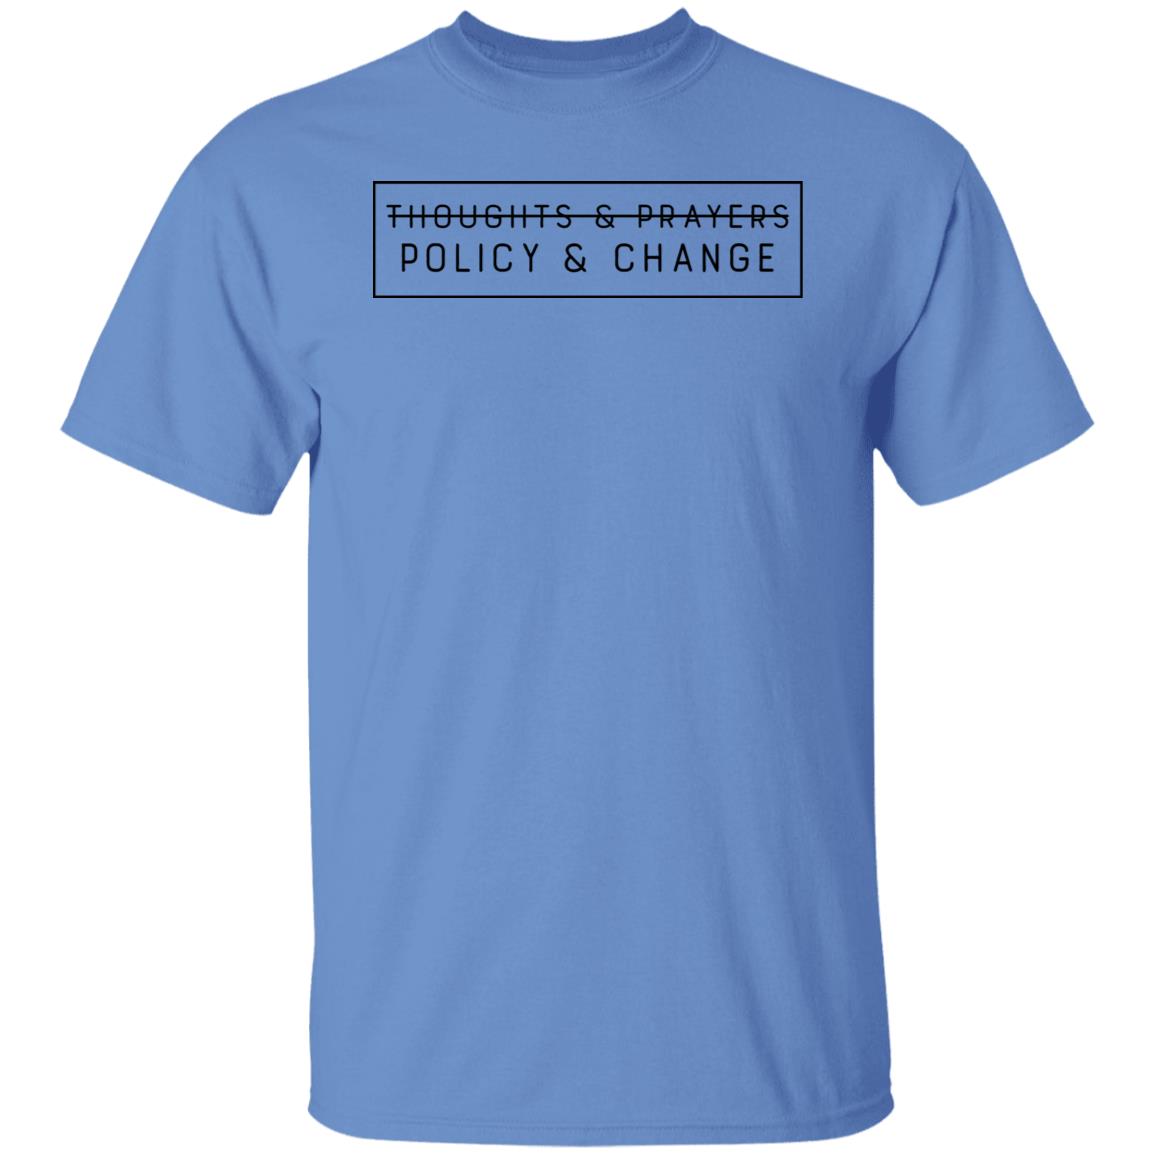 Thoughts And Prayers Policy And Change Shirt Emily Winston